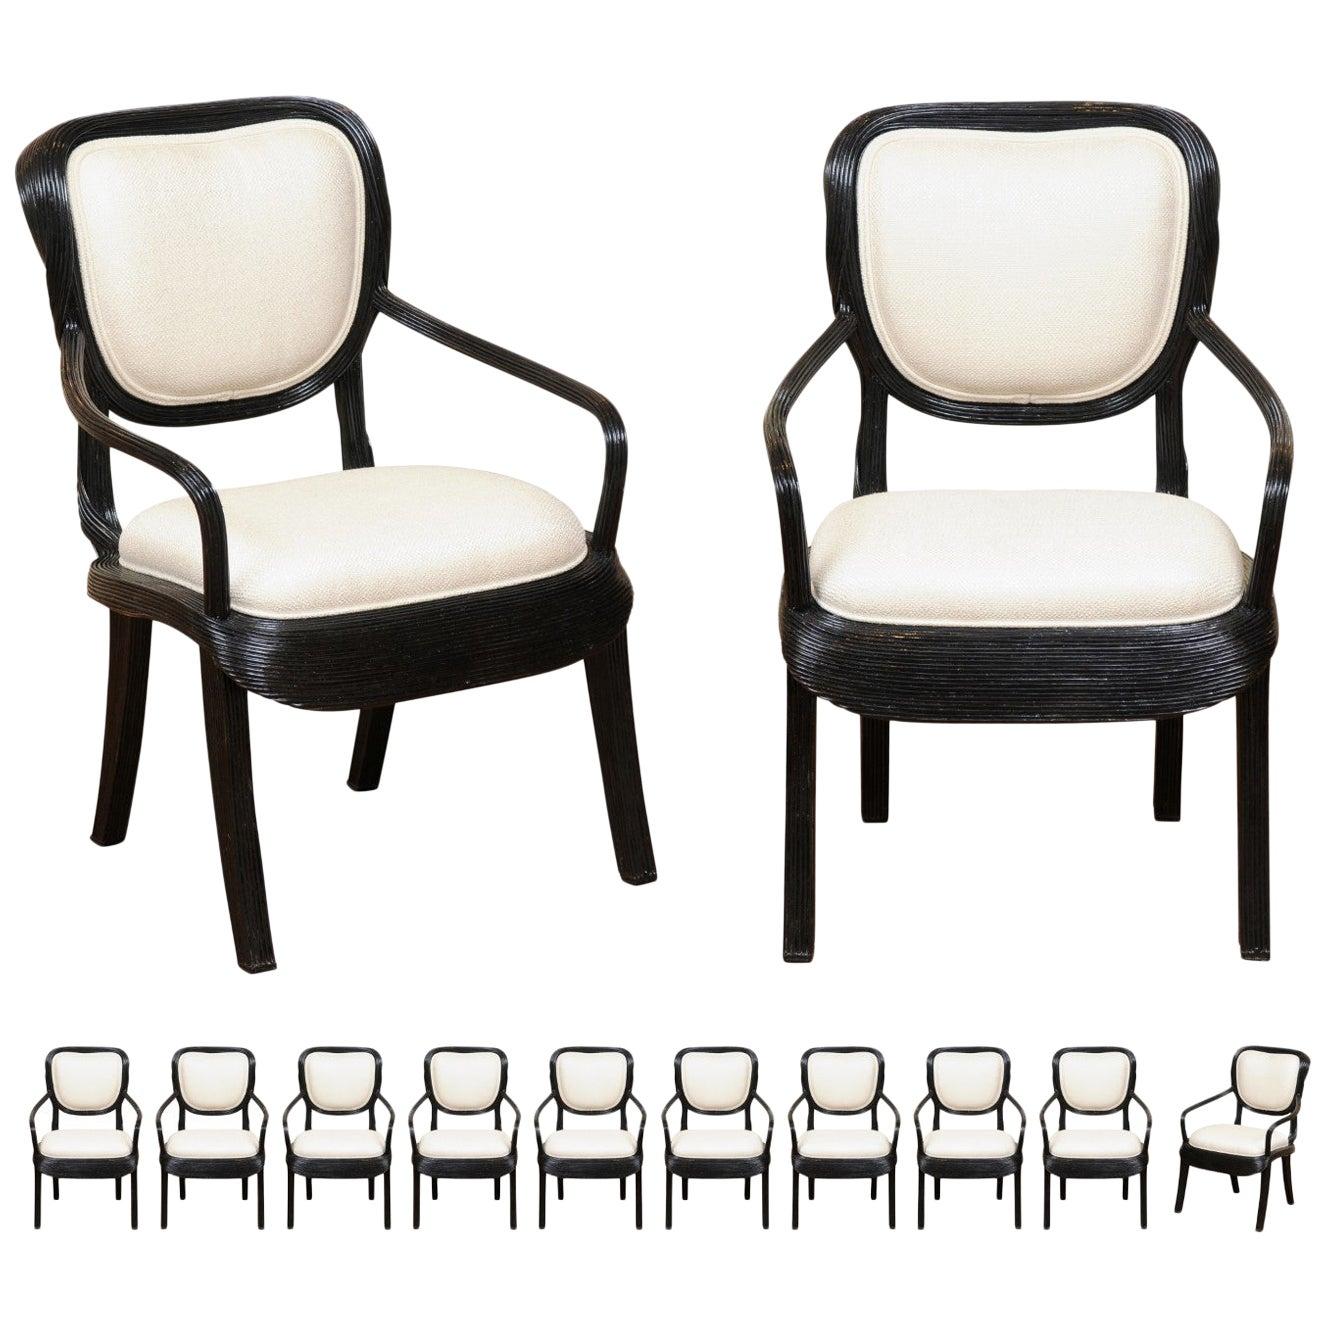 Extraordinary Set of 14 Trompe L'oiel Arm Dining Chairs by Cobonpue, circa 1980